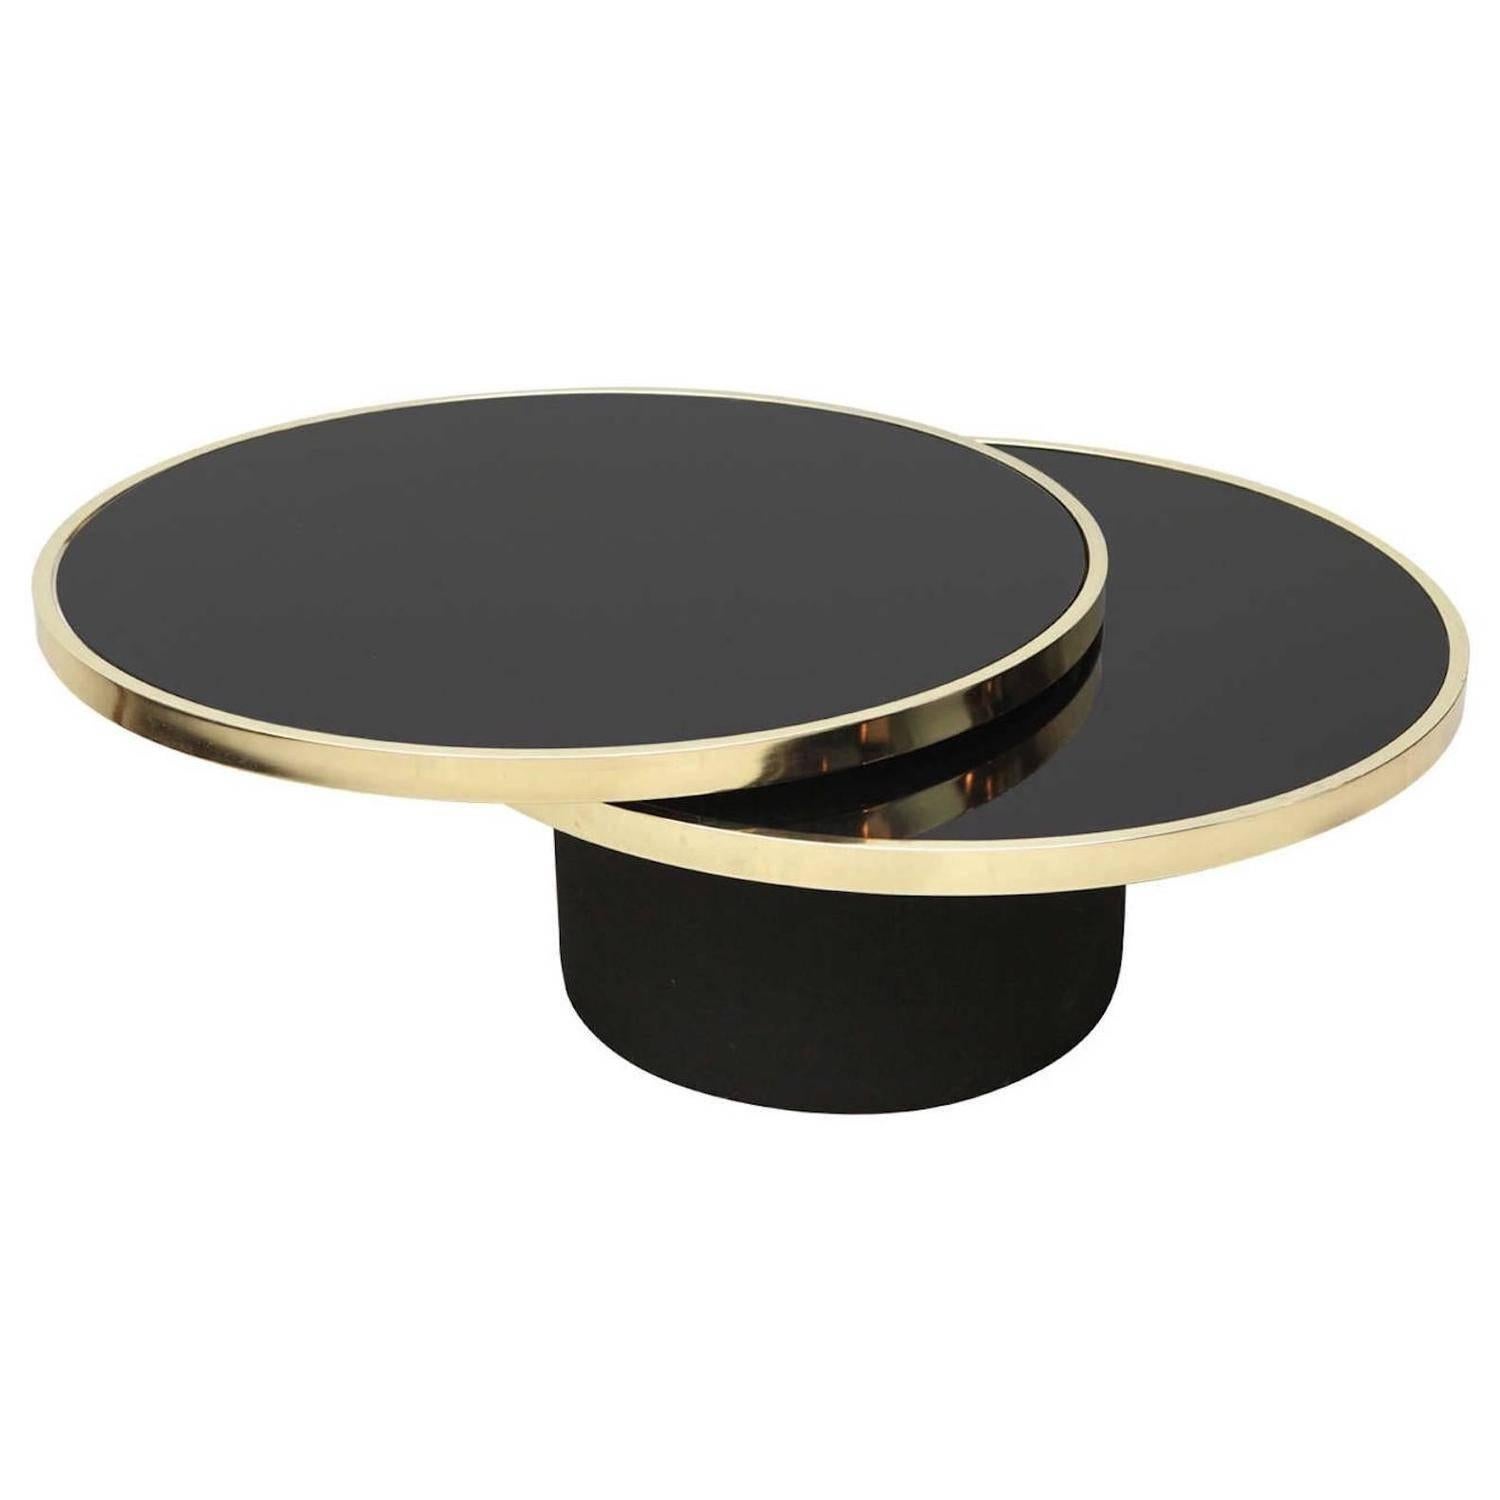 Black Glass and Brass Swivel Coffee Table by the Design Institute of America